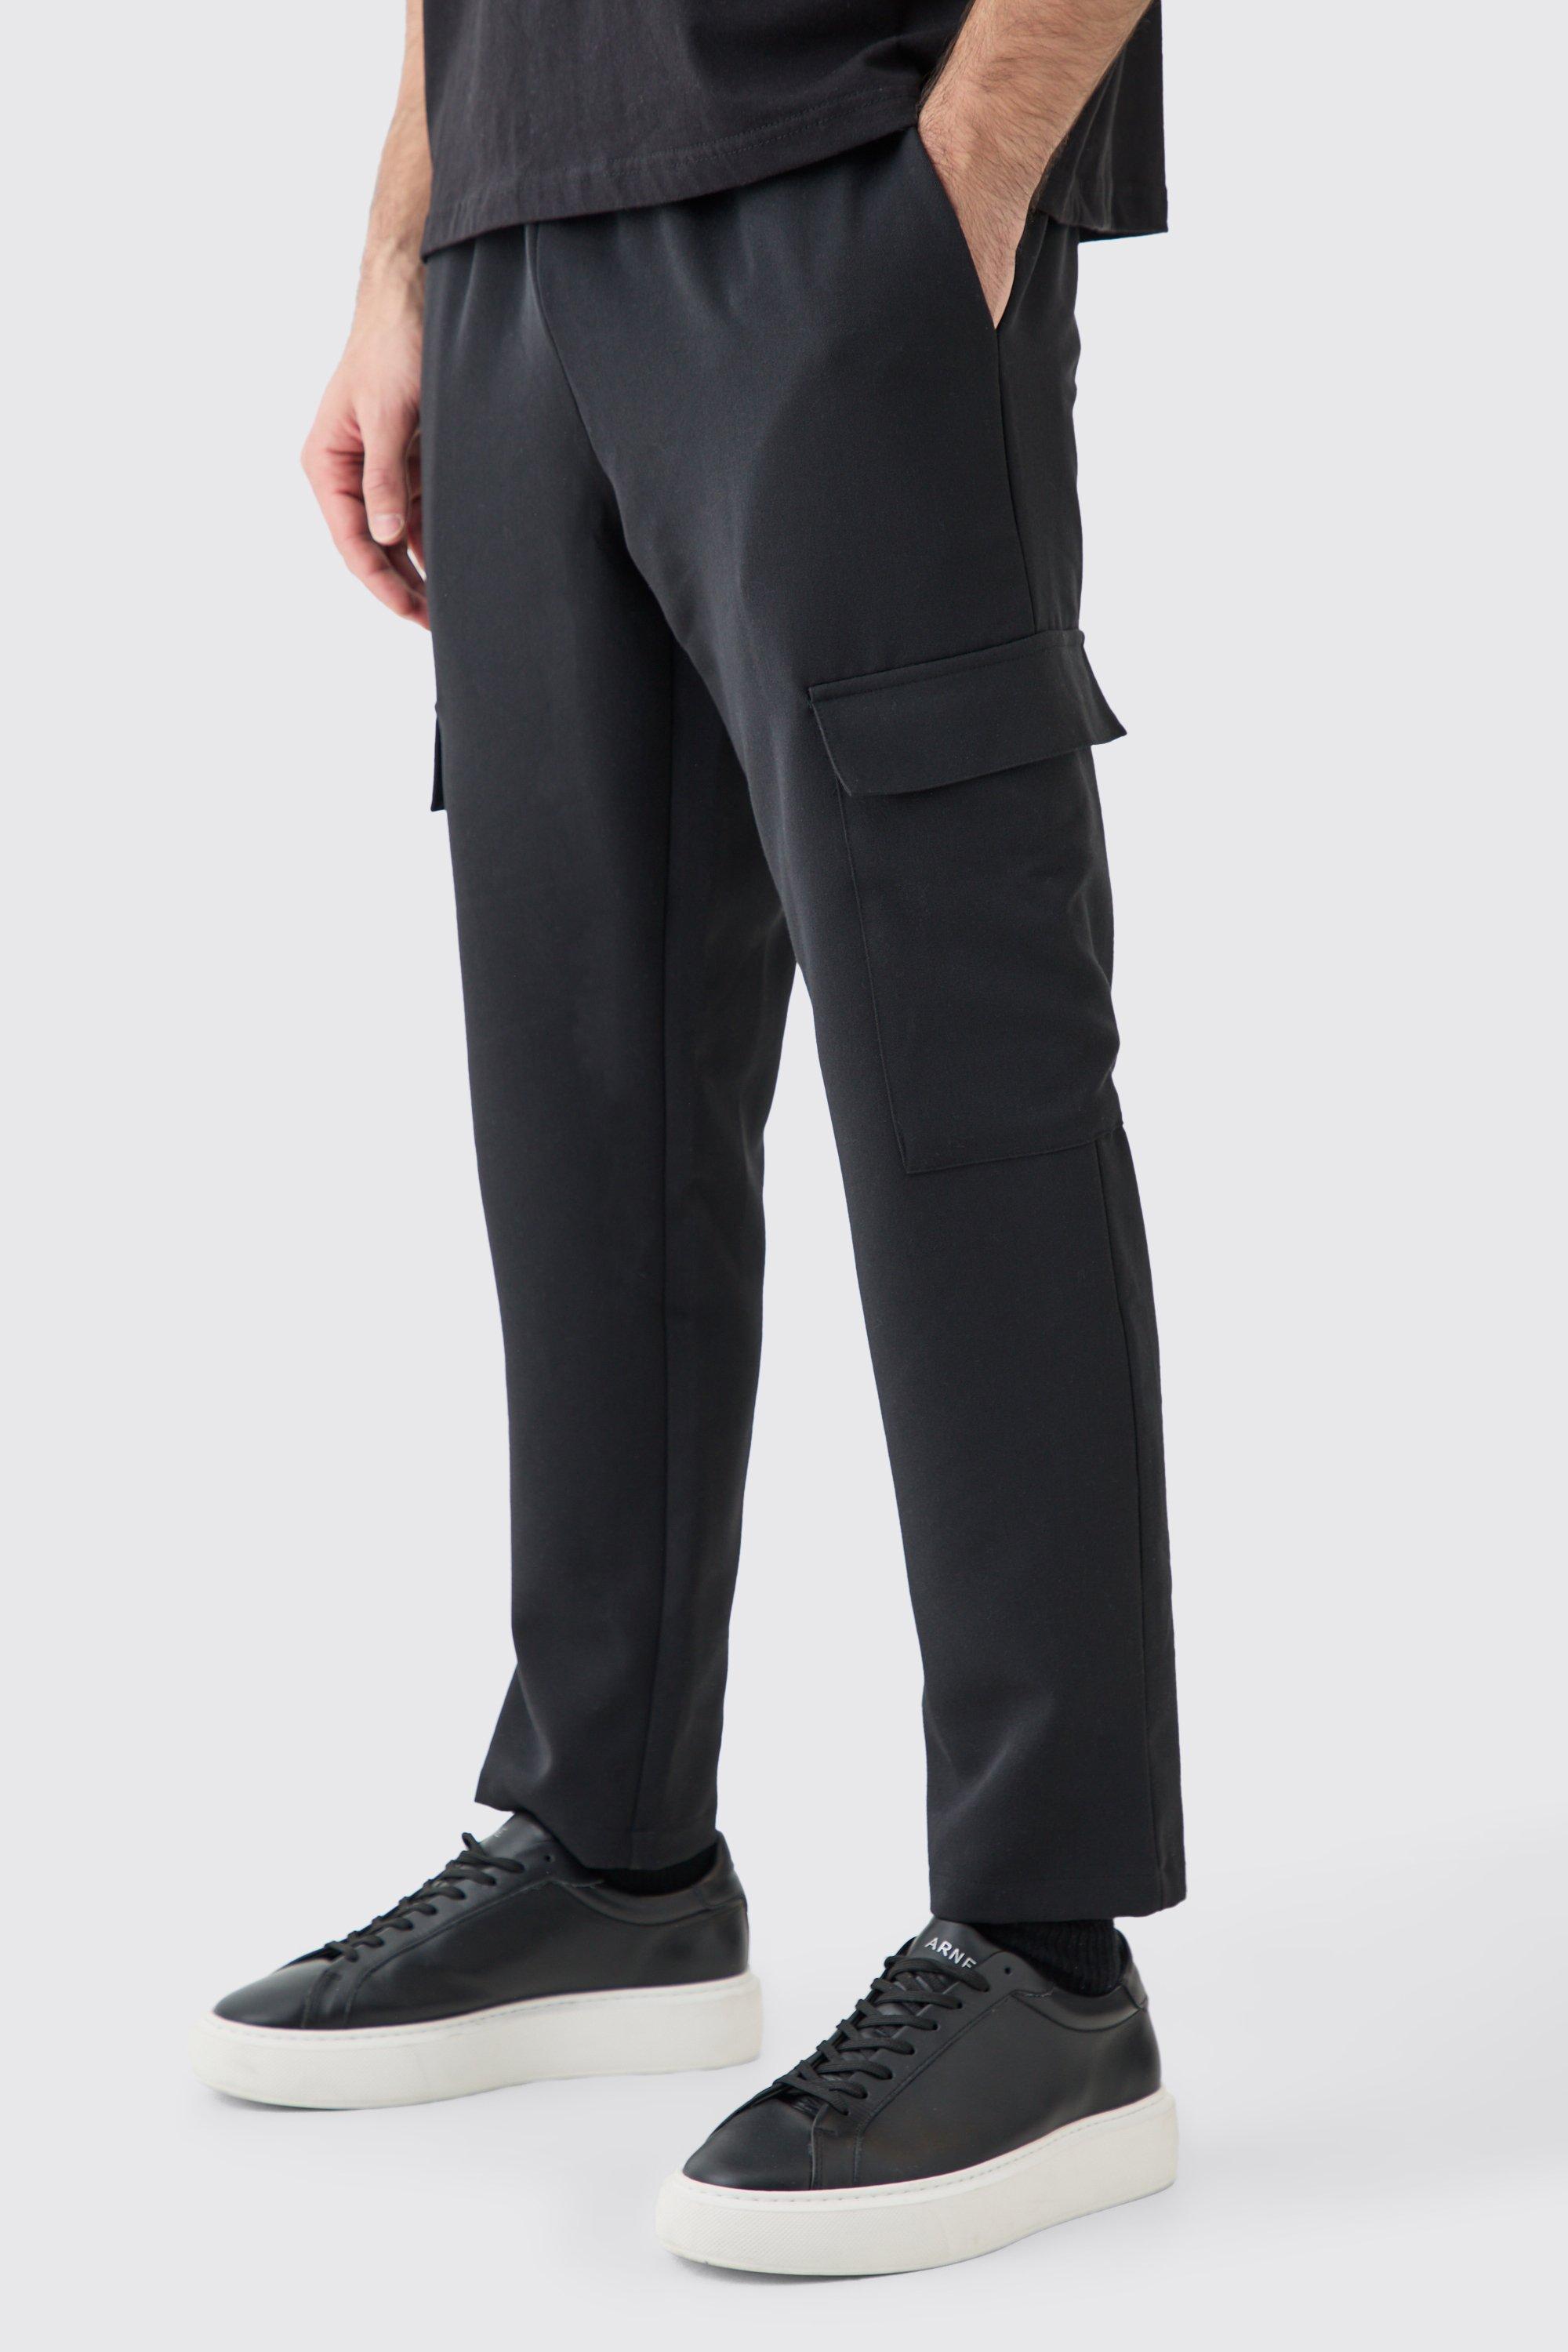 Mens Black Elasticated Waist Tapered Cargo Trousers, Black